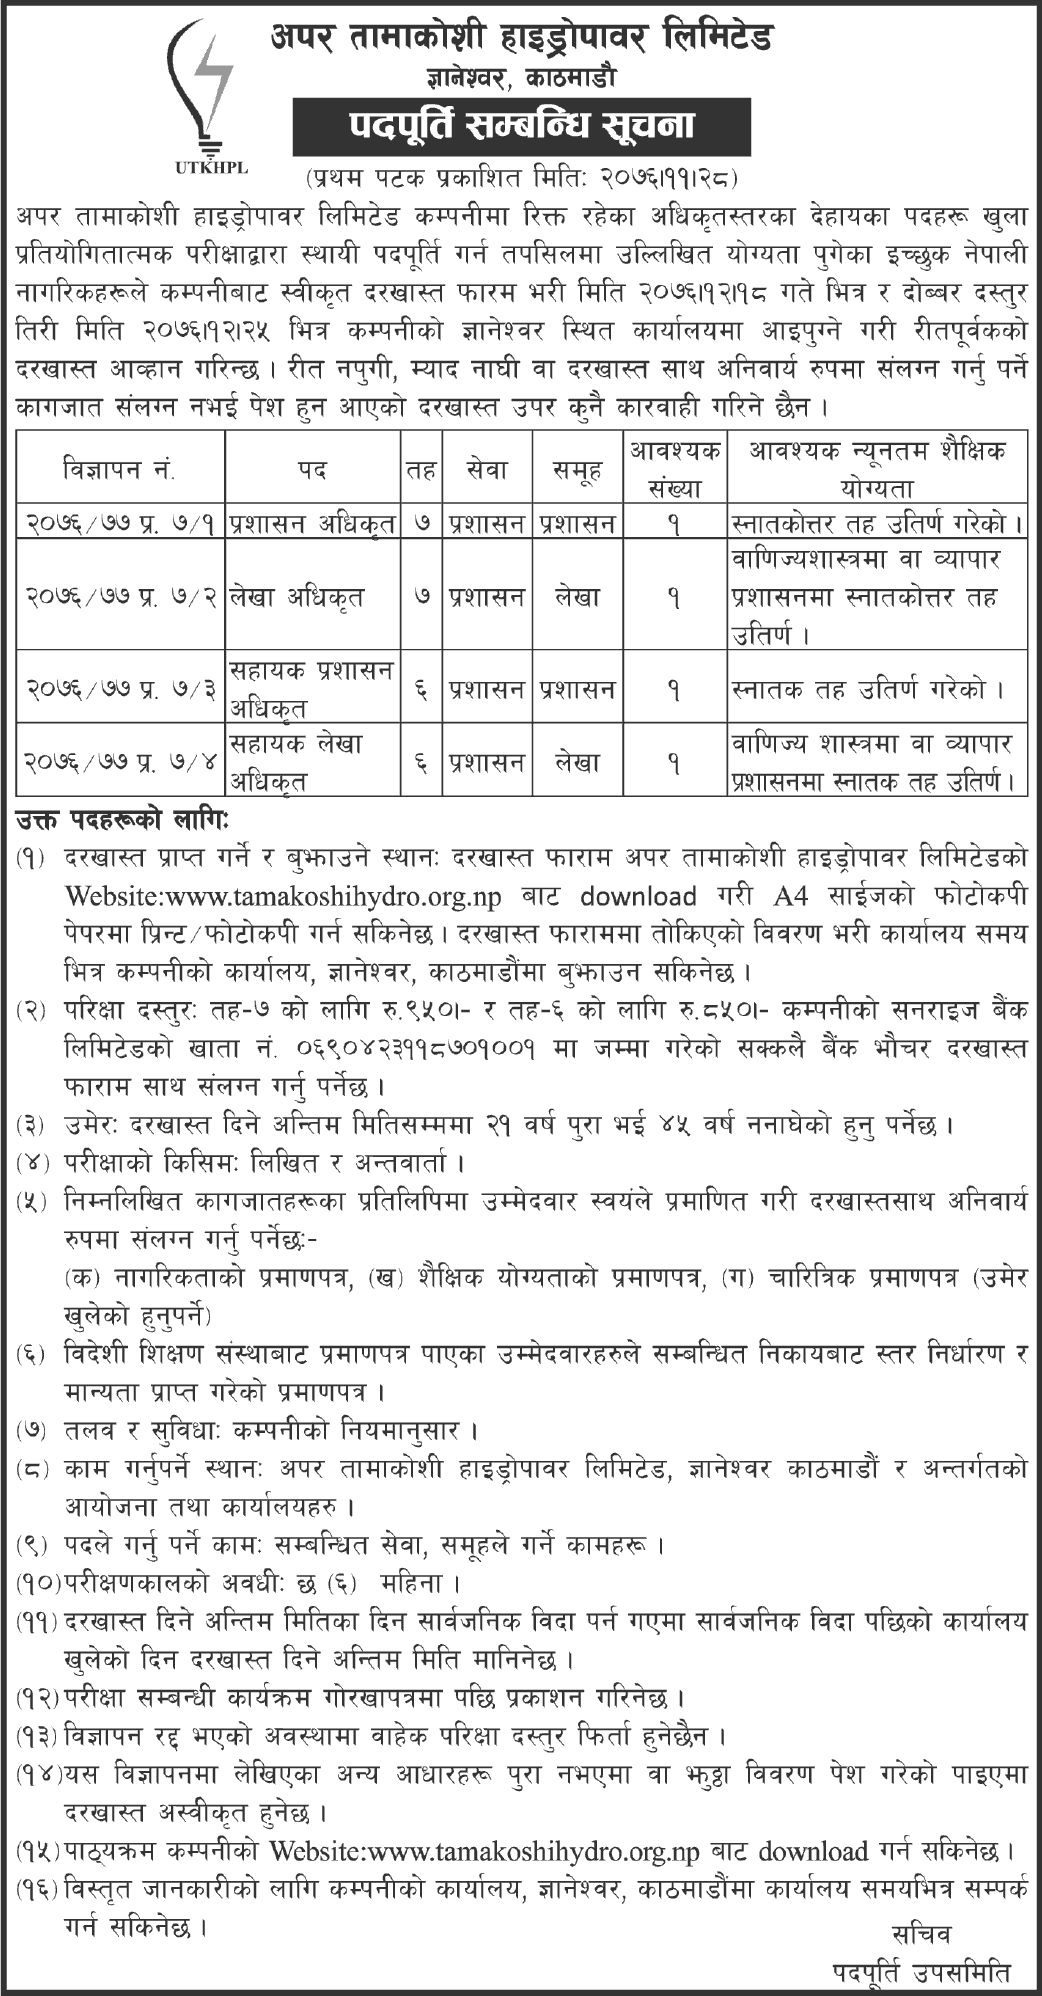 Upper Tamakoshi Hydropower Limited Vacancy for Various Positions